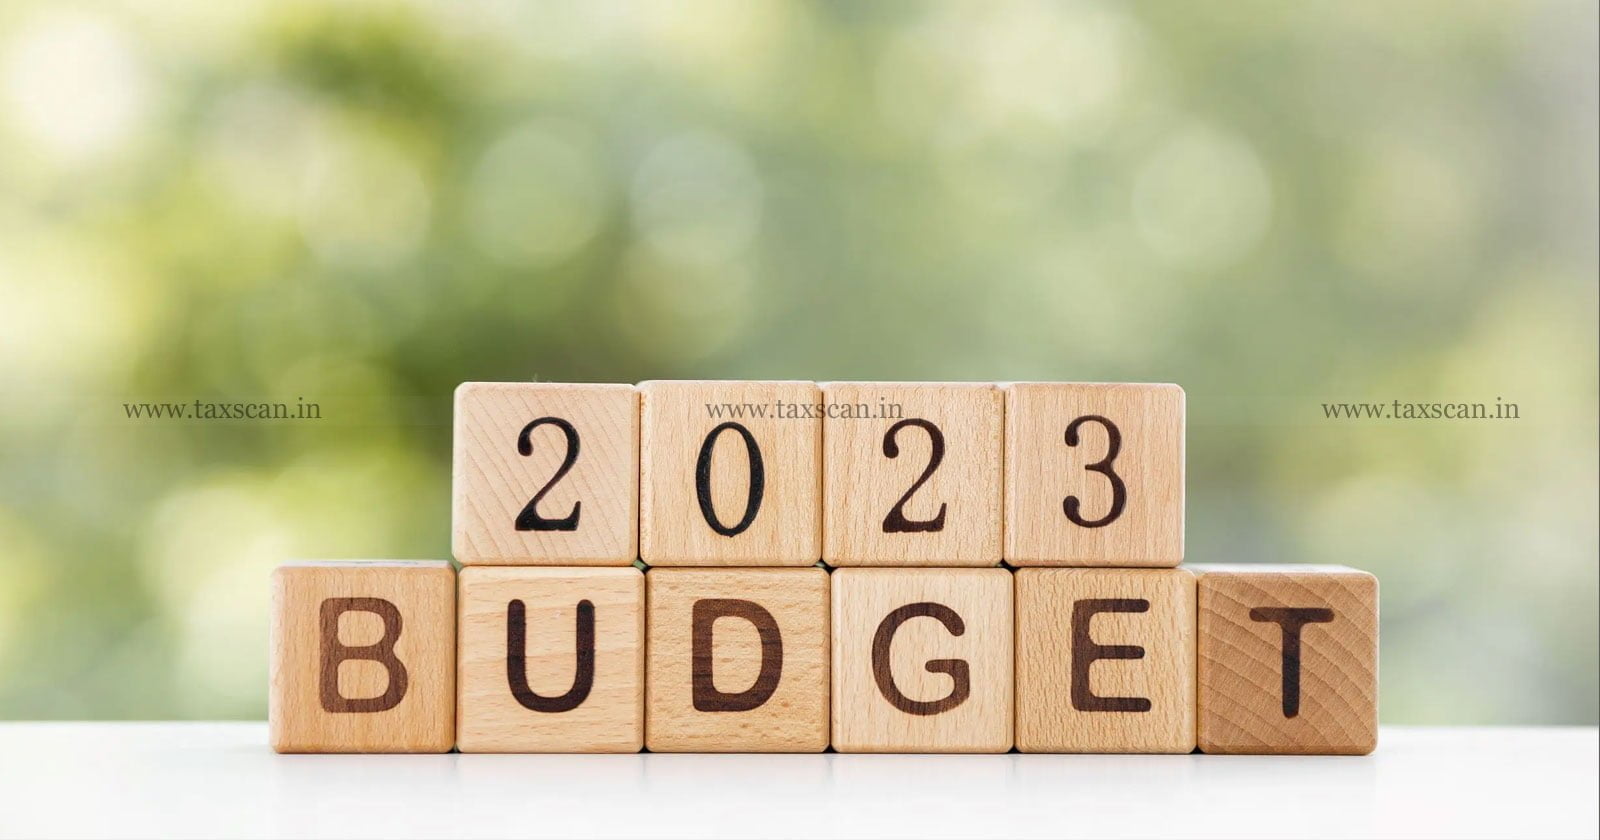 Budget 2023 - Second phase of budget session - Taxscan